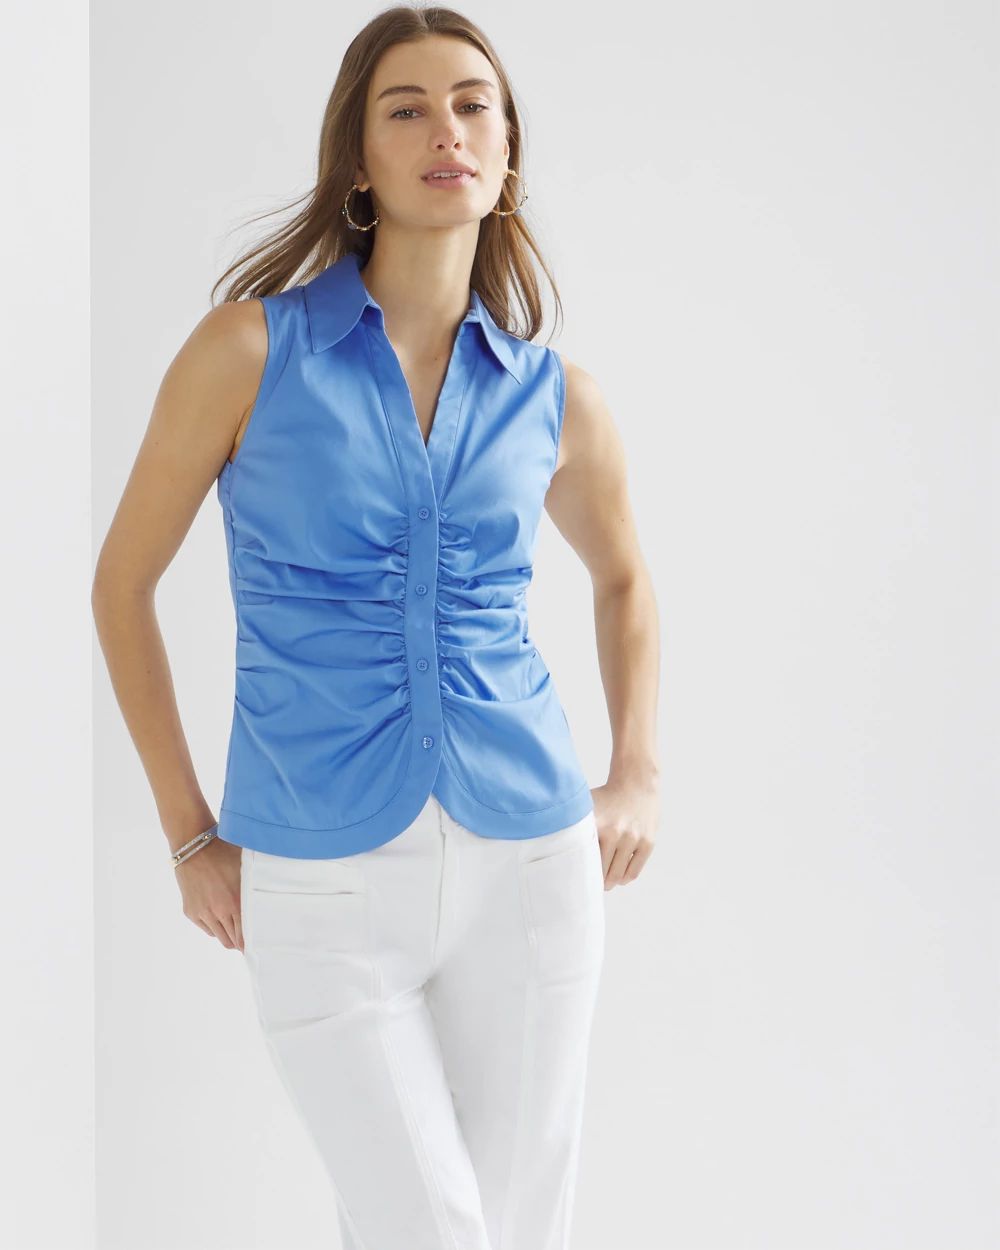 Sleeveless Ruched Front Shirt click to view larger image.